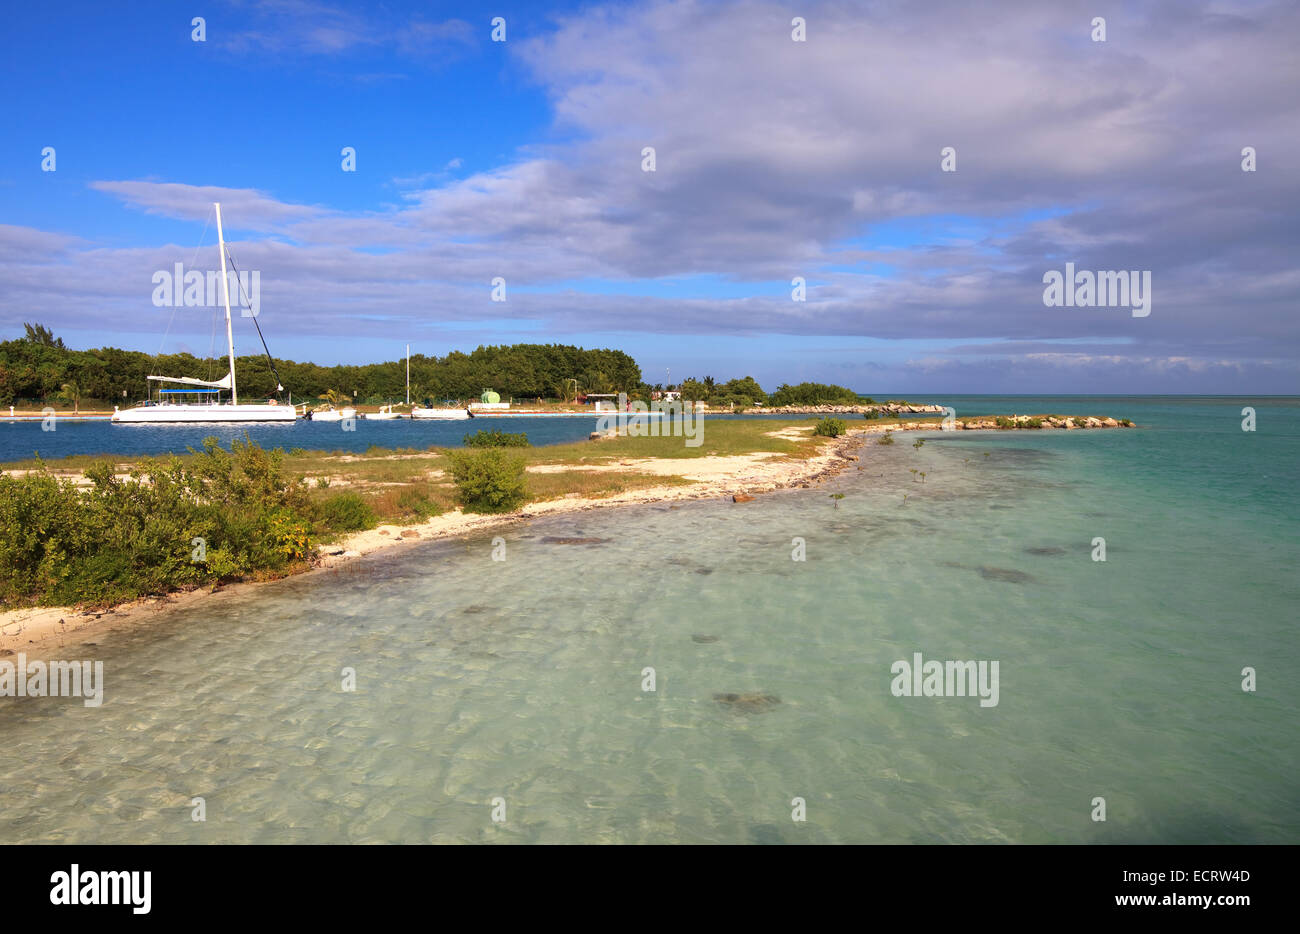 Seaport on Cayo Guillermo in the Cuba. Stock Photo